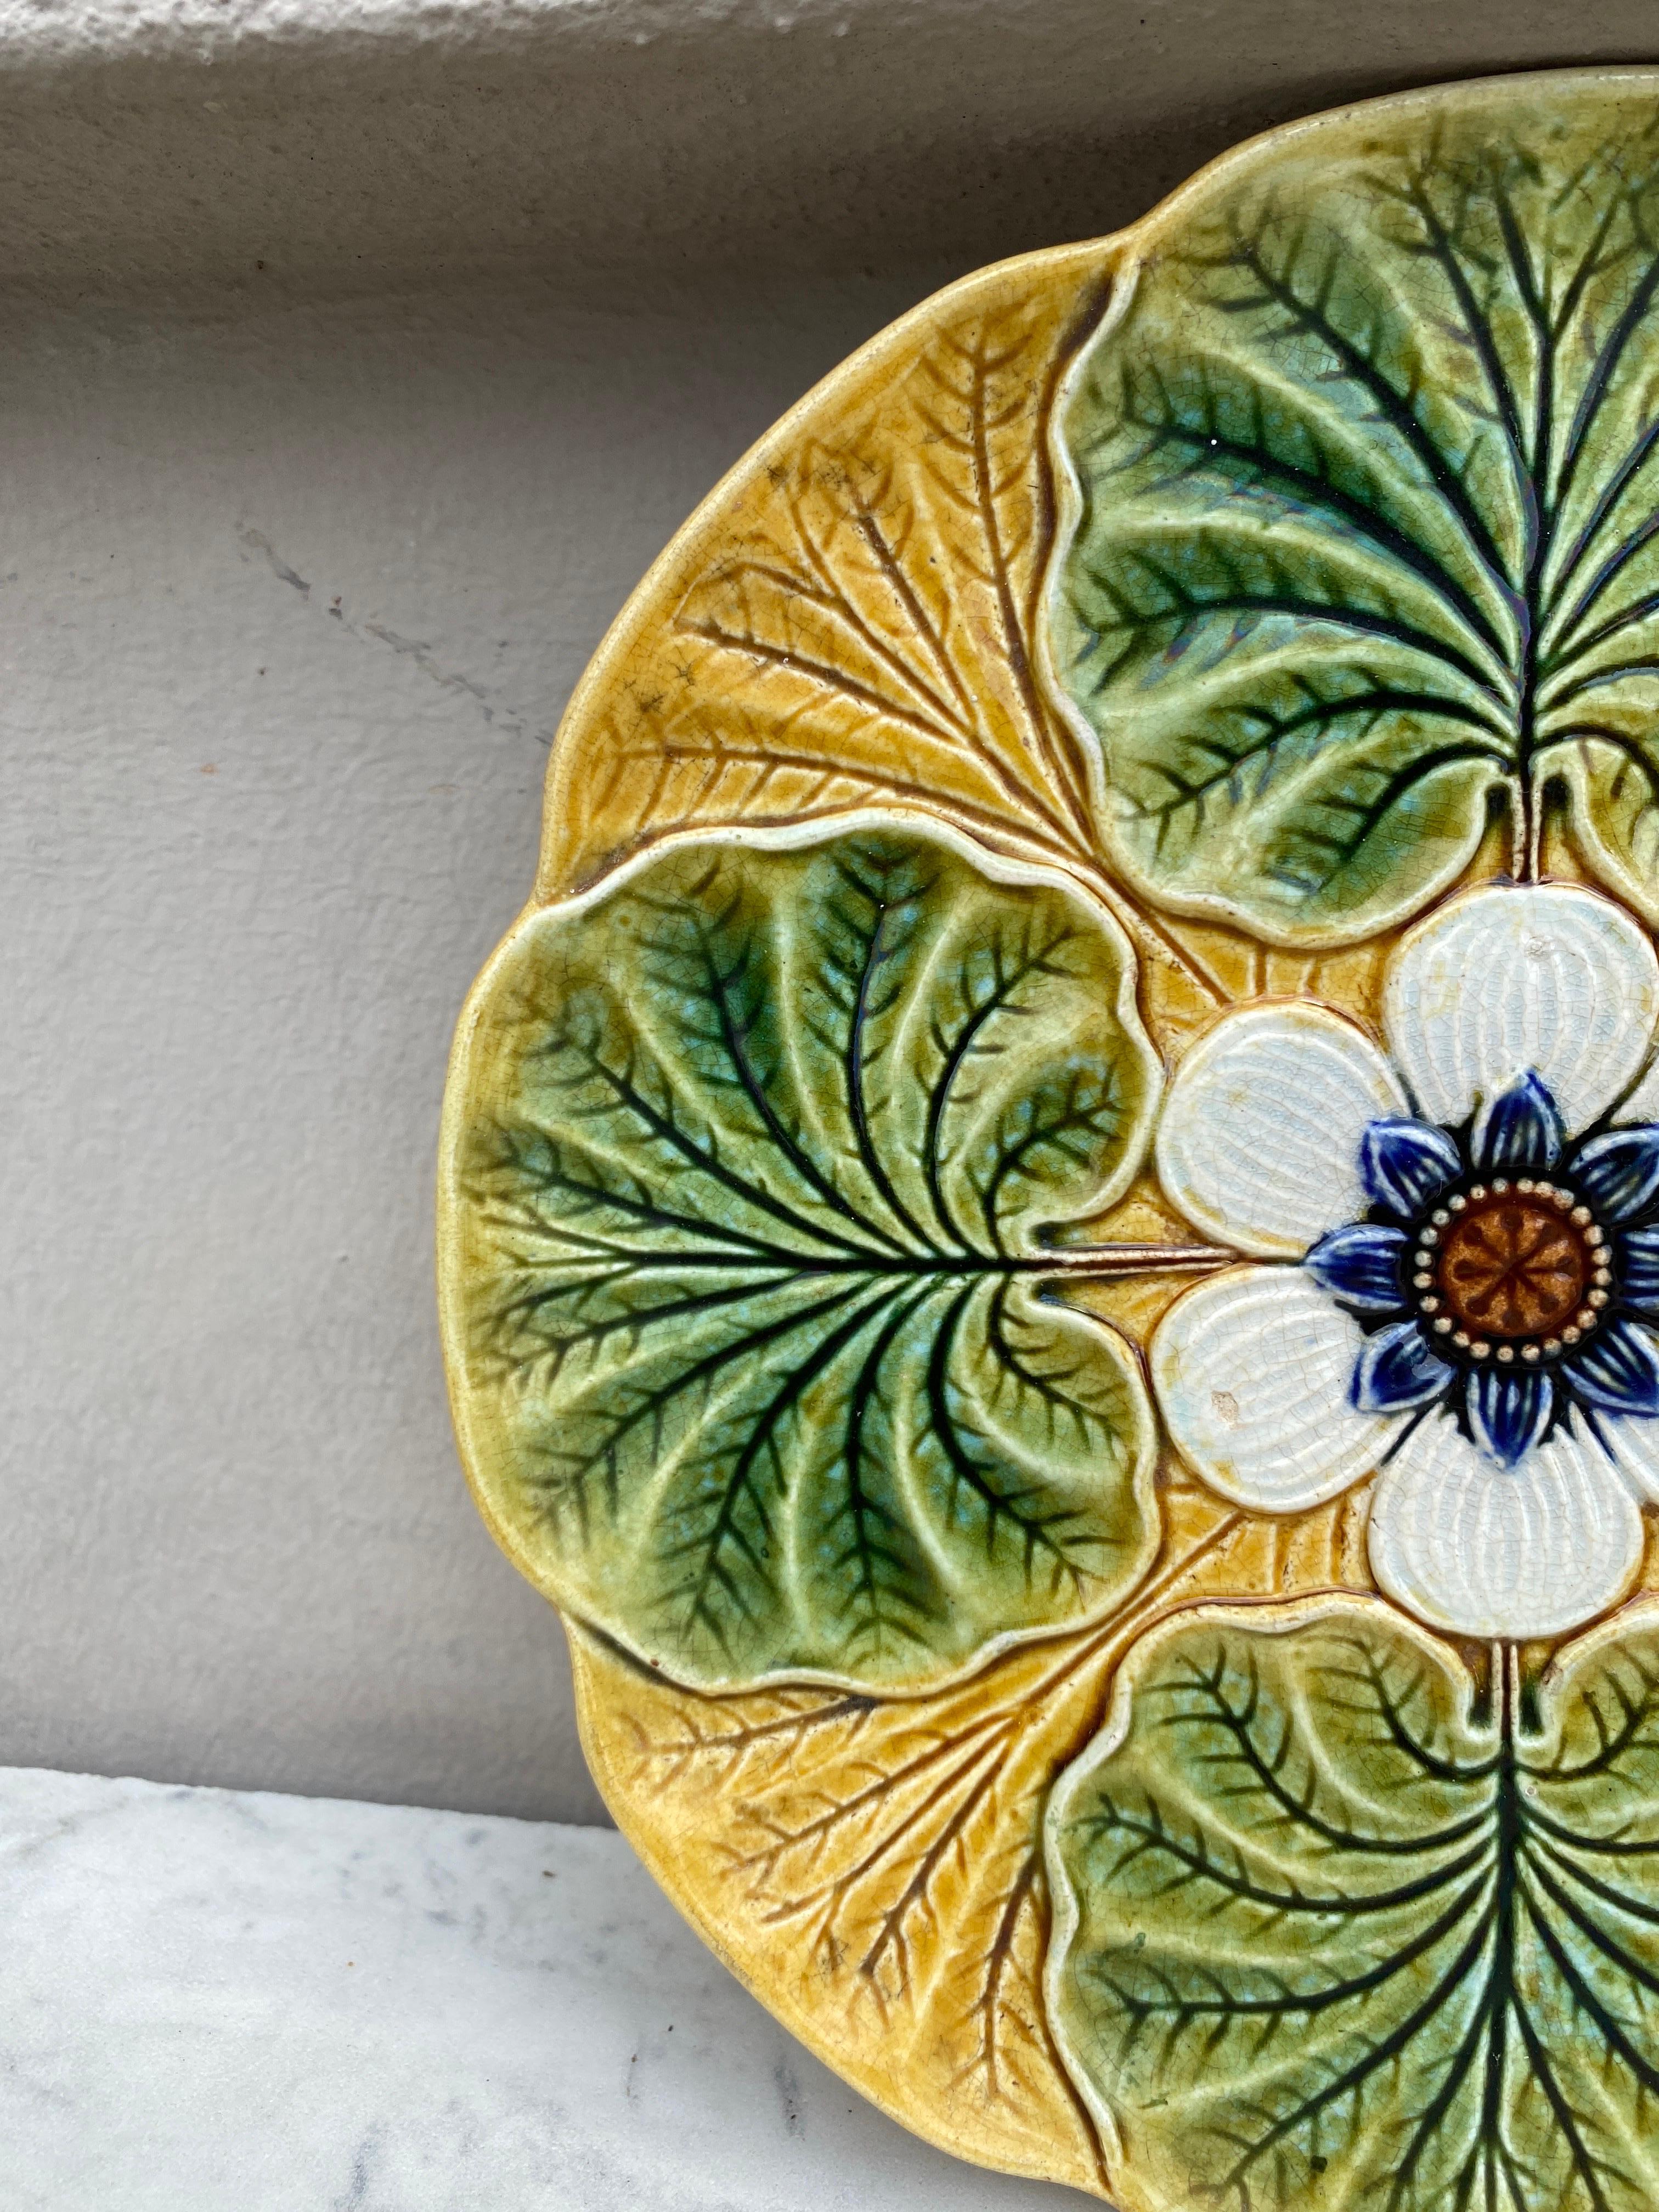 Victorian Majolica Water Lily Pond Plate Wasmuel, circa 1890 For Sale